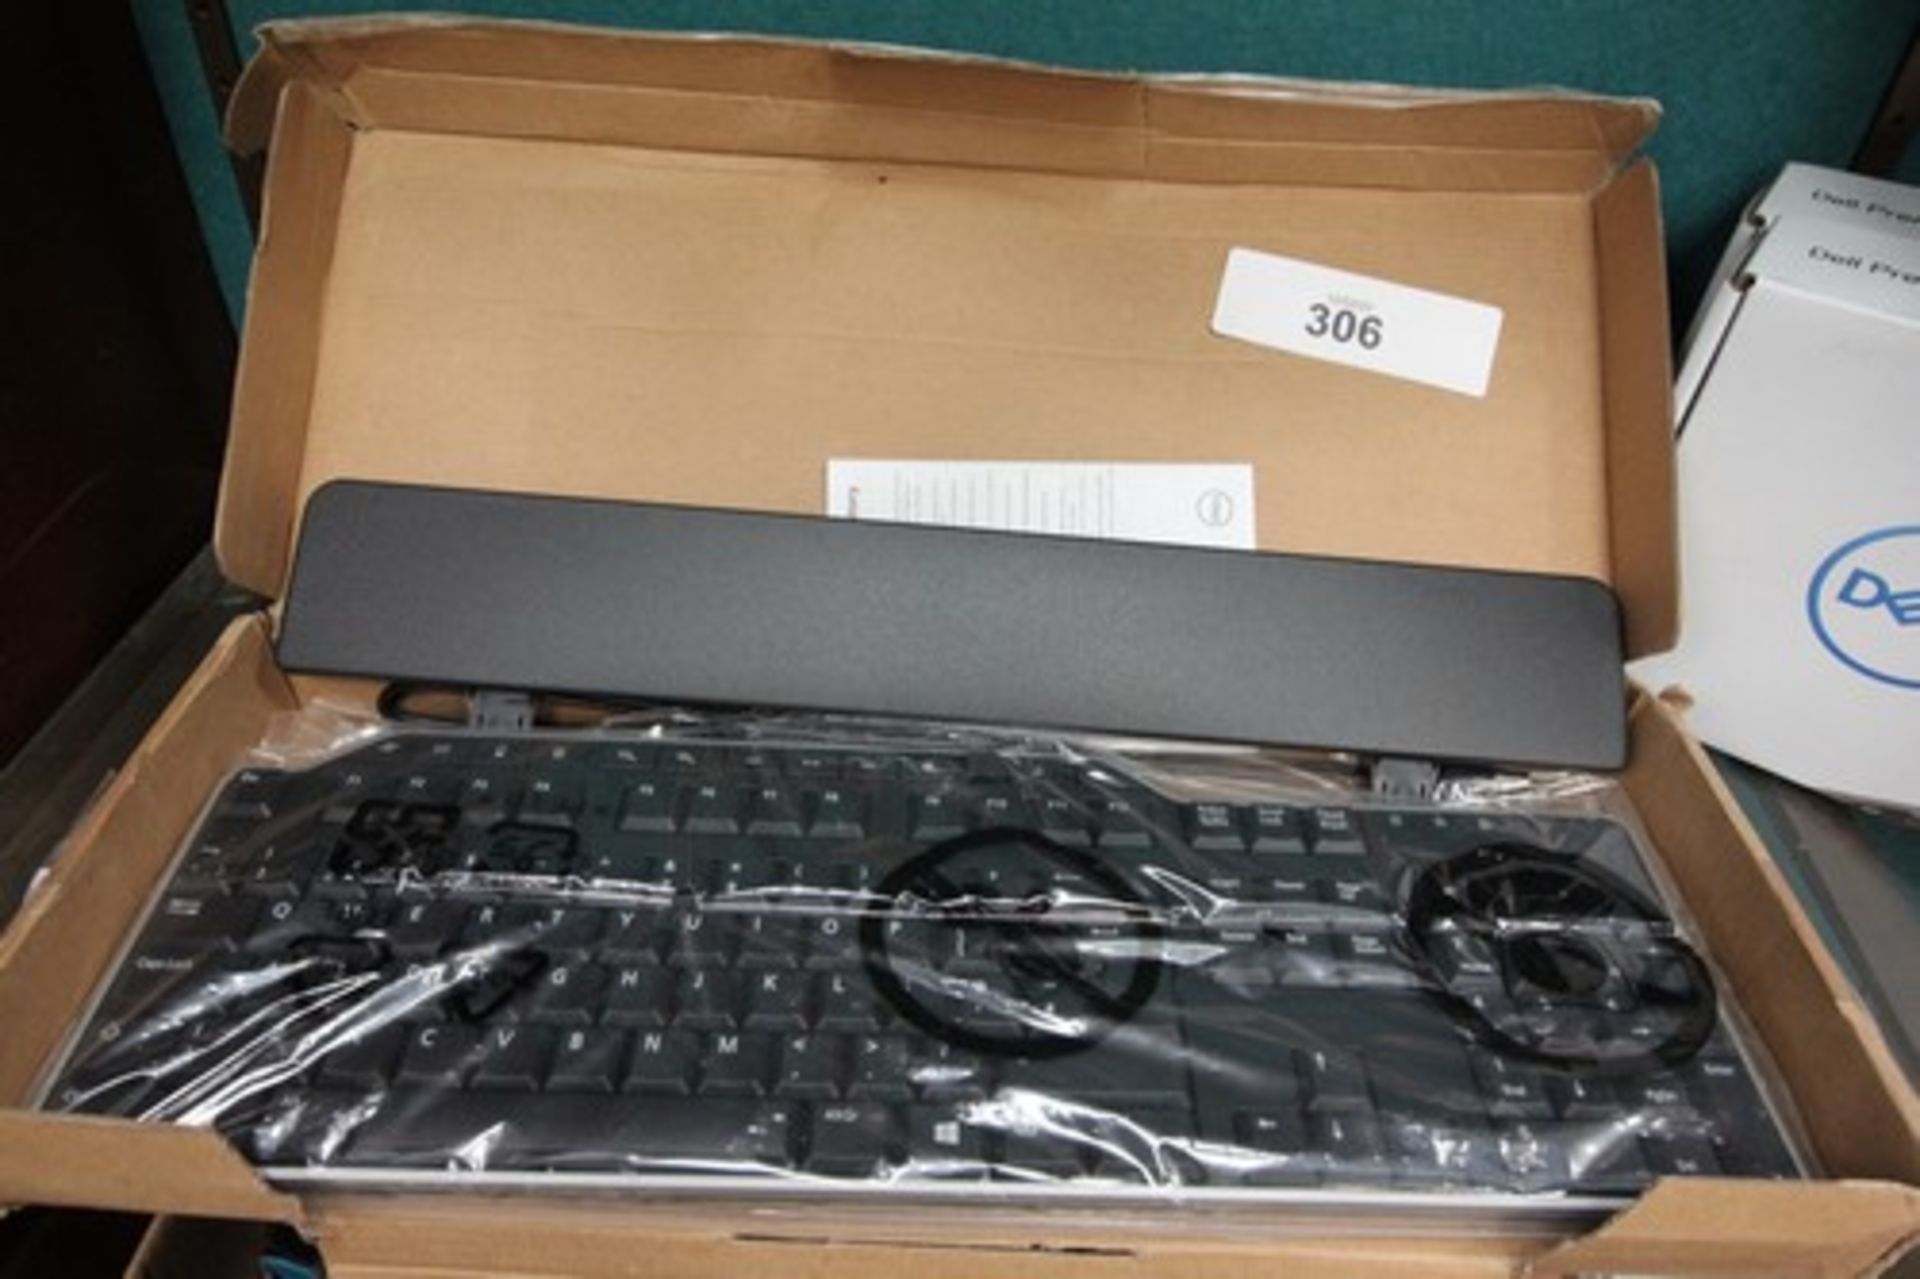 2 x Dell wireless keyboards and 1 x Dell wired keyboard - New in tatty box (C5)